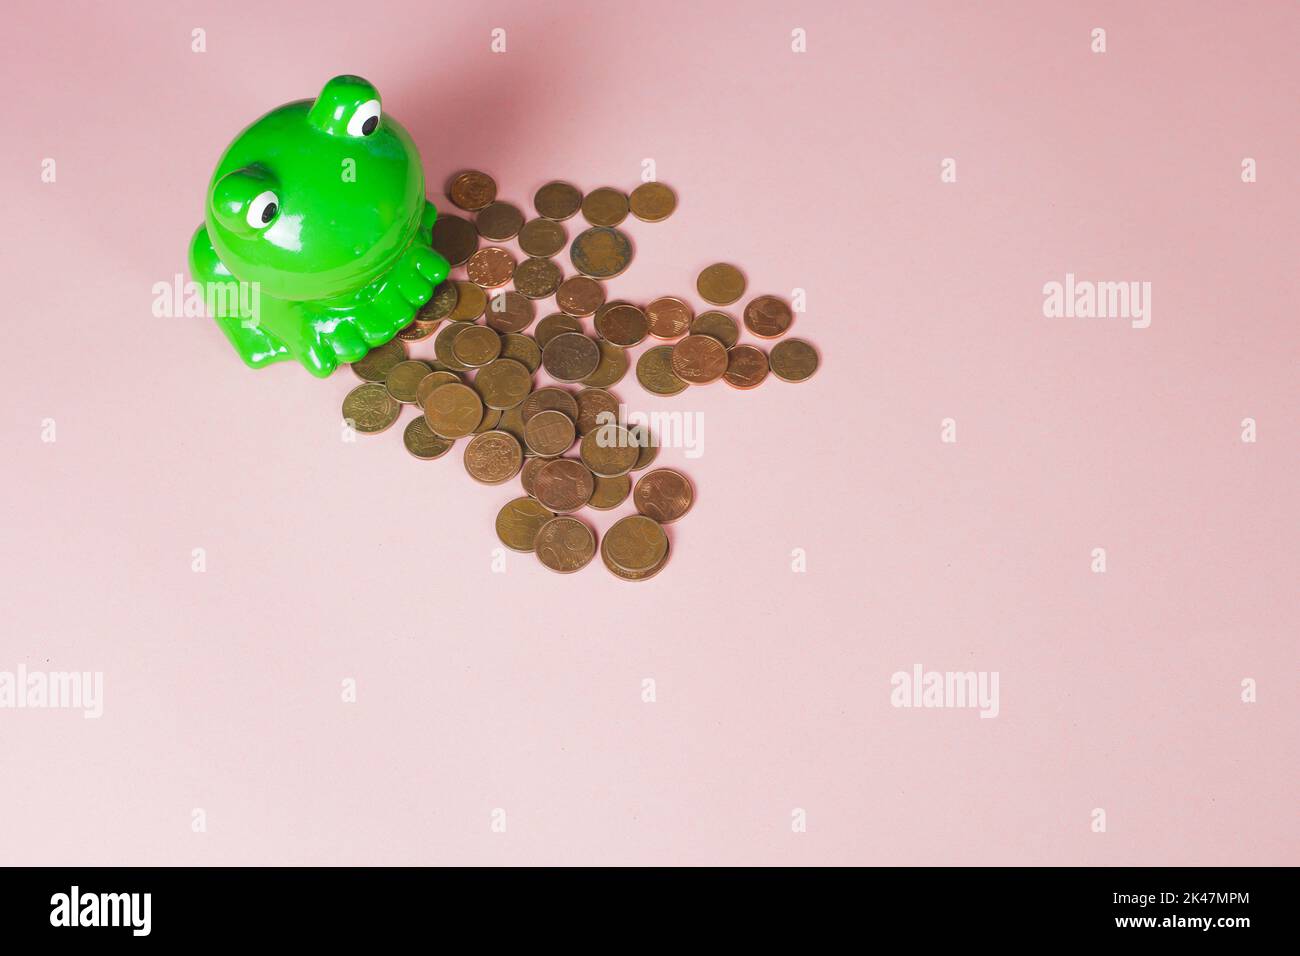 Ceramic moneybox, shape and color of green frog. Euro coins poured out from the cash bank on the pink background with copy space for text. Piggy bank. Stock Photo